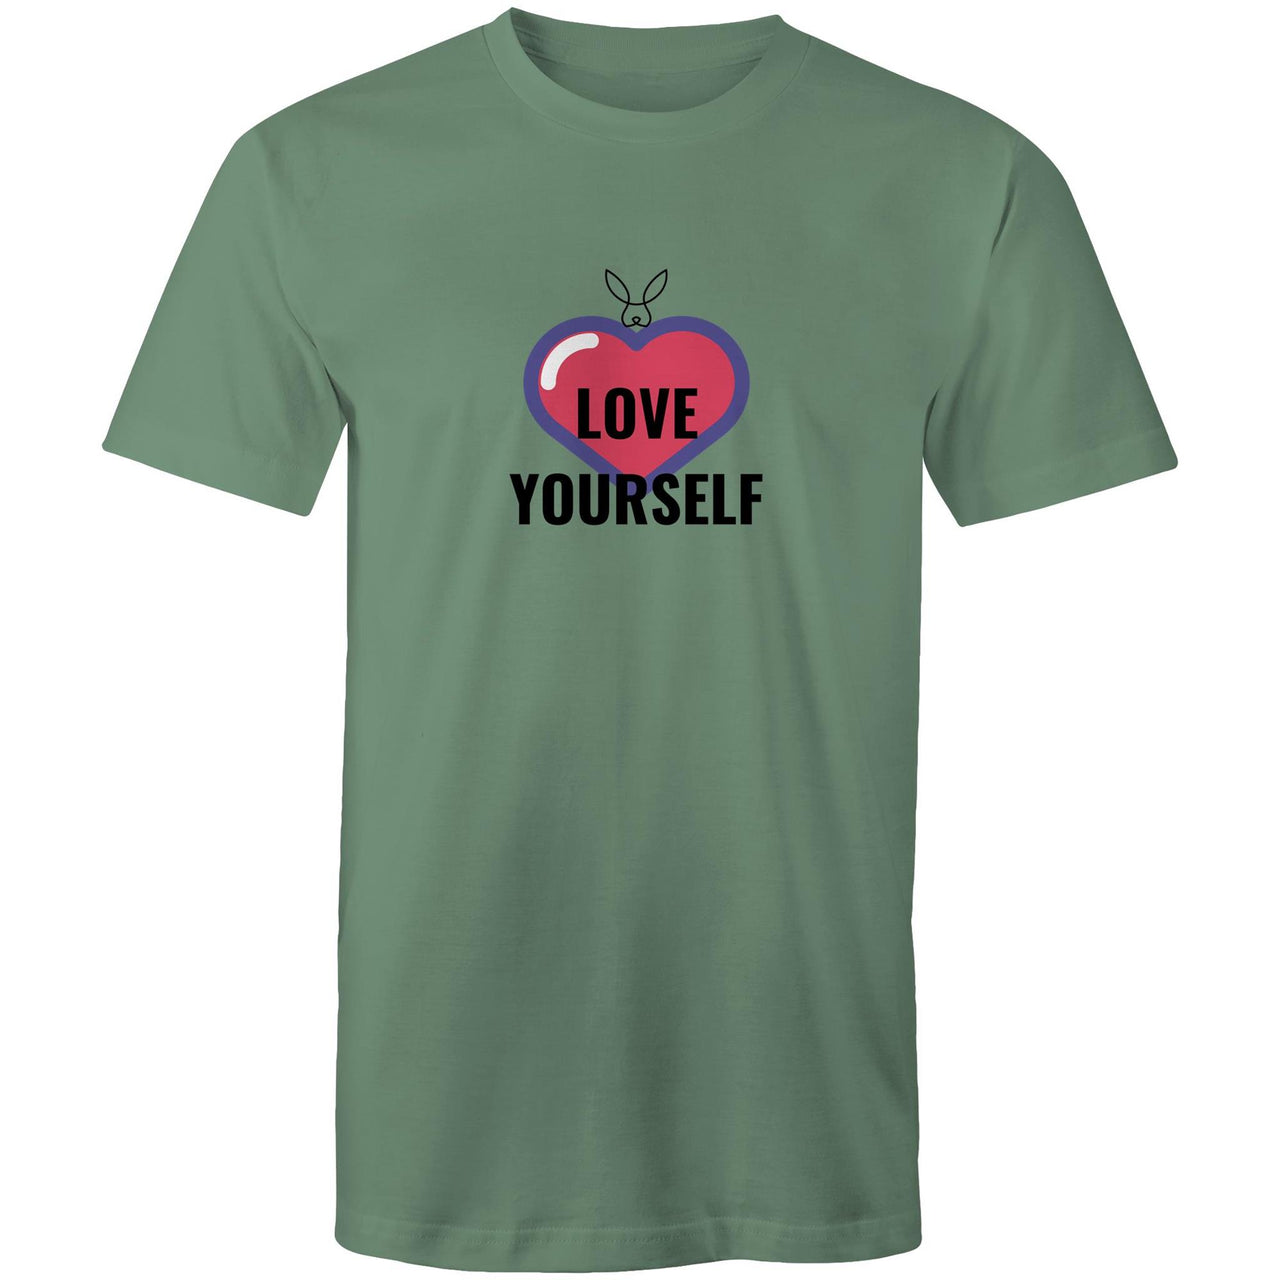 Love Yourself Crew T-Shirt by CBF Clothing Army green